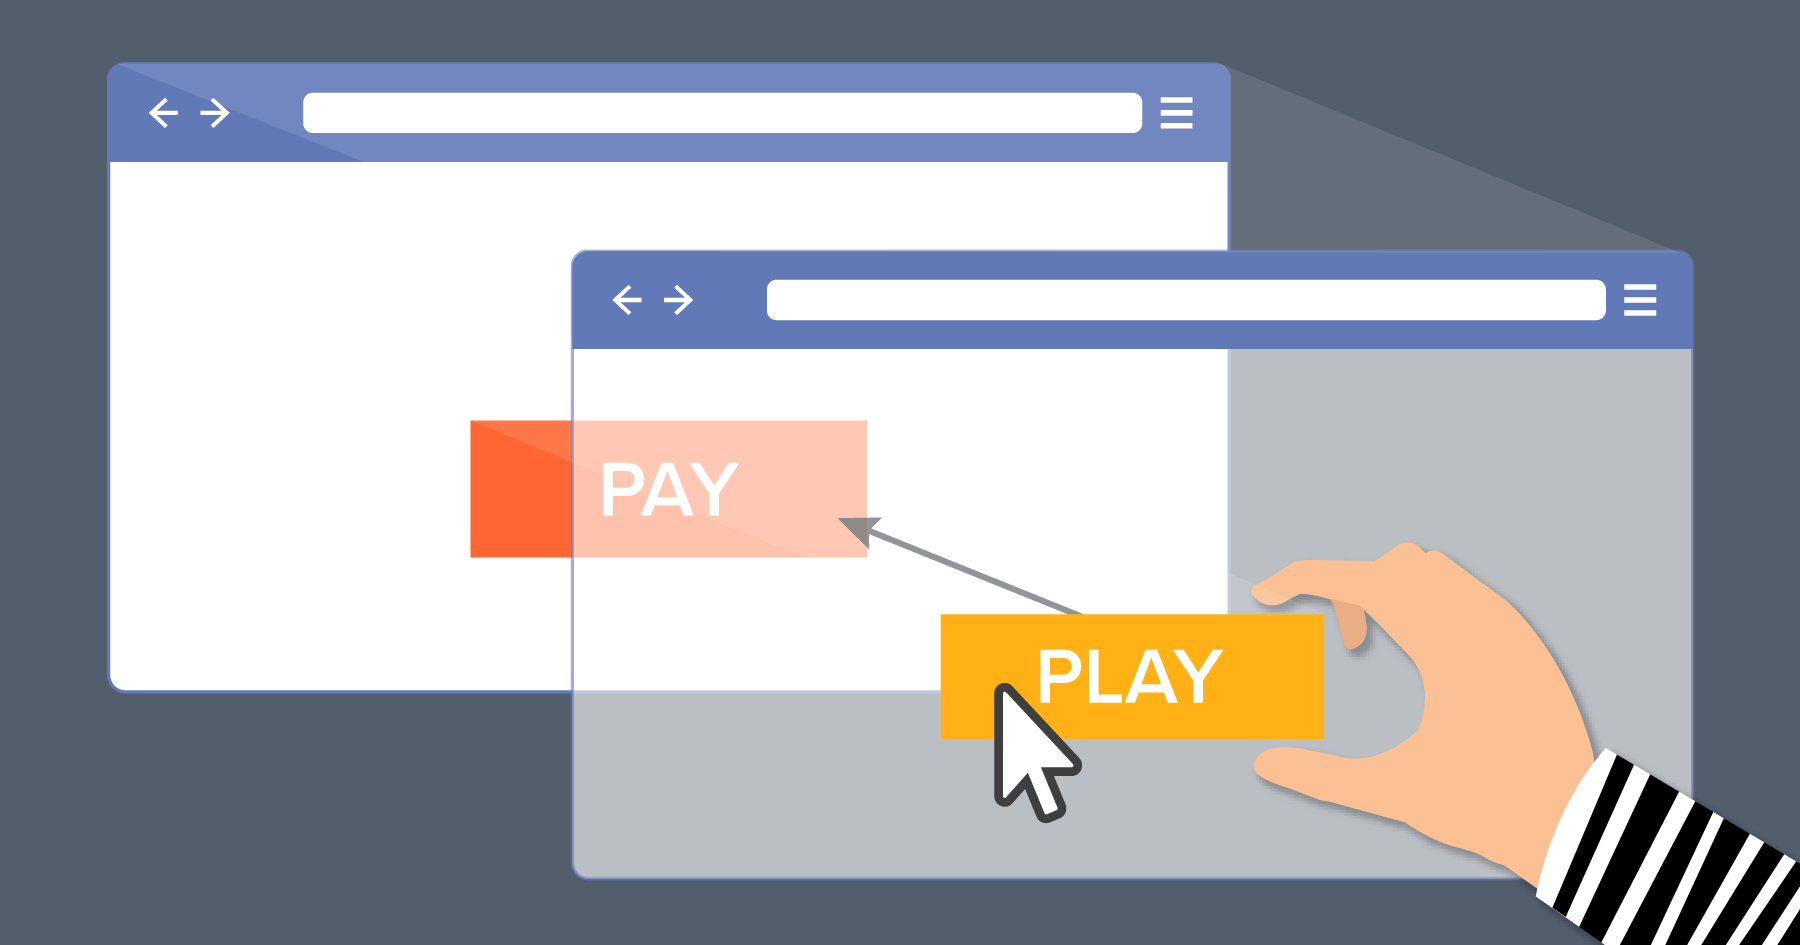 Clickjacking Attacks: What They Are and How to Prevent Them